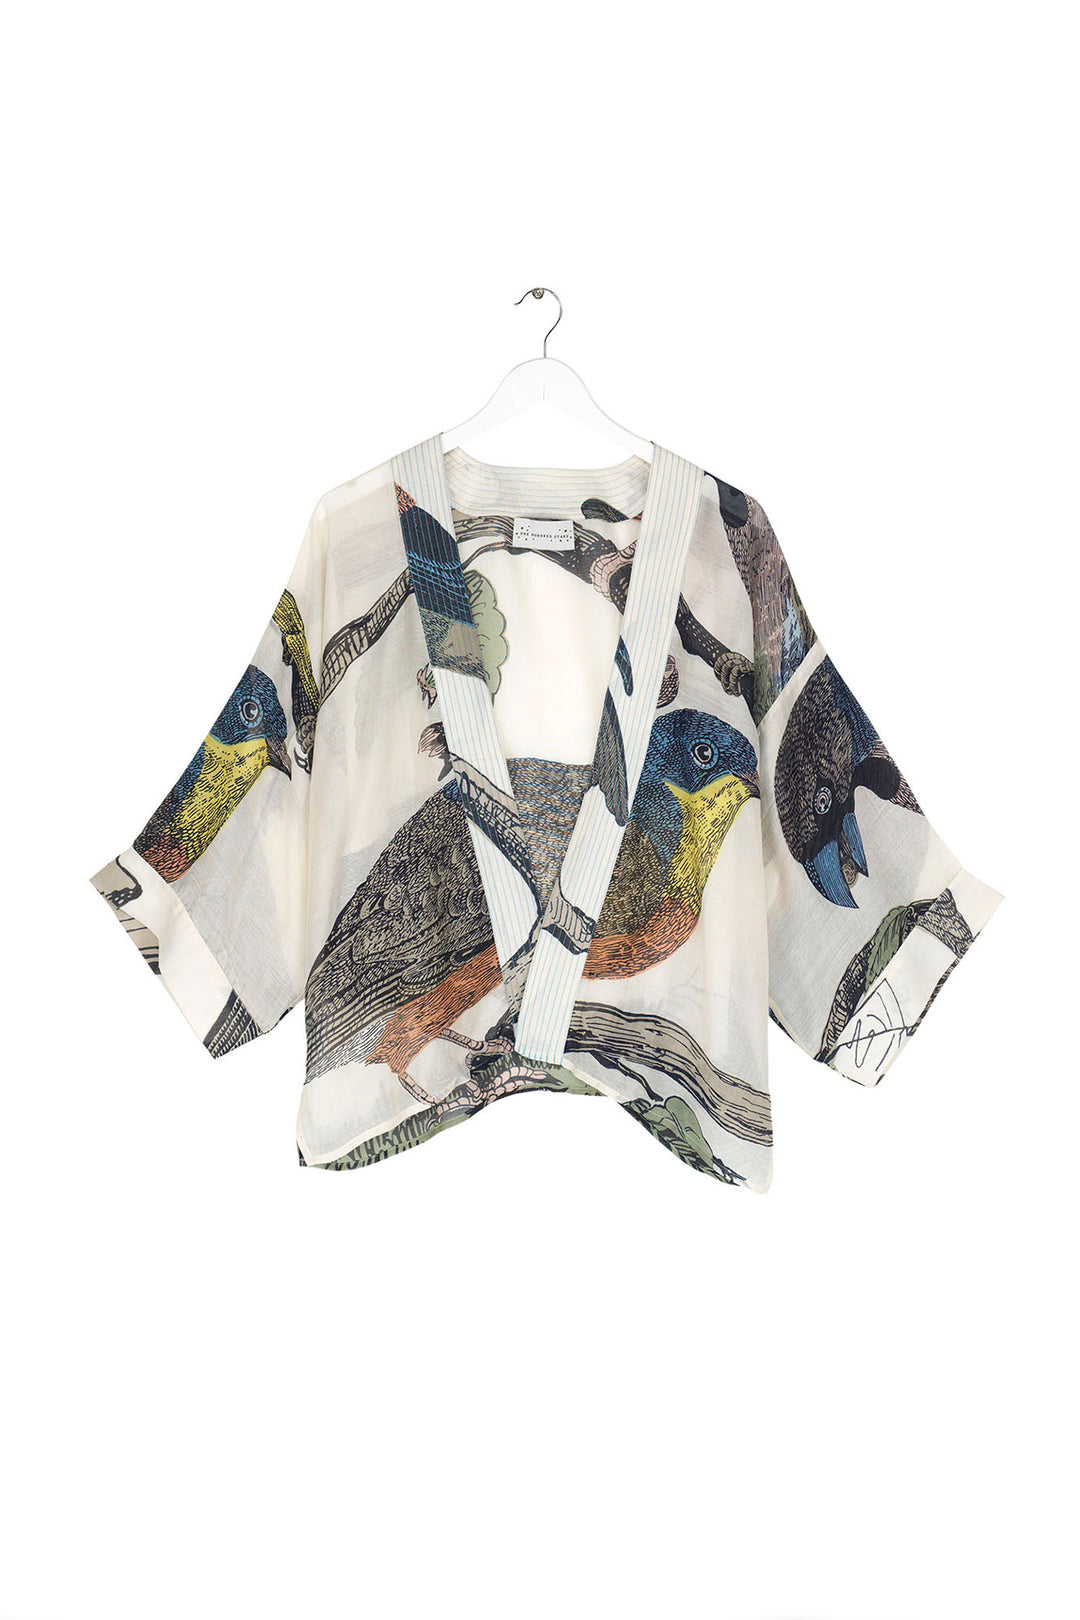 ladies short open front kimono with a colourful bird print on a light stone background by One Hundred Stars